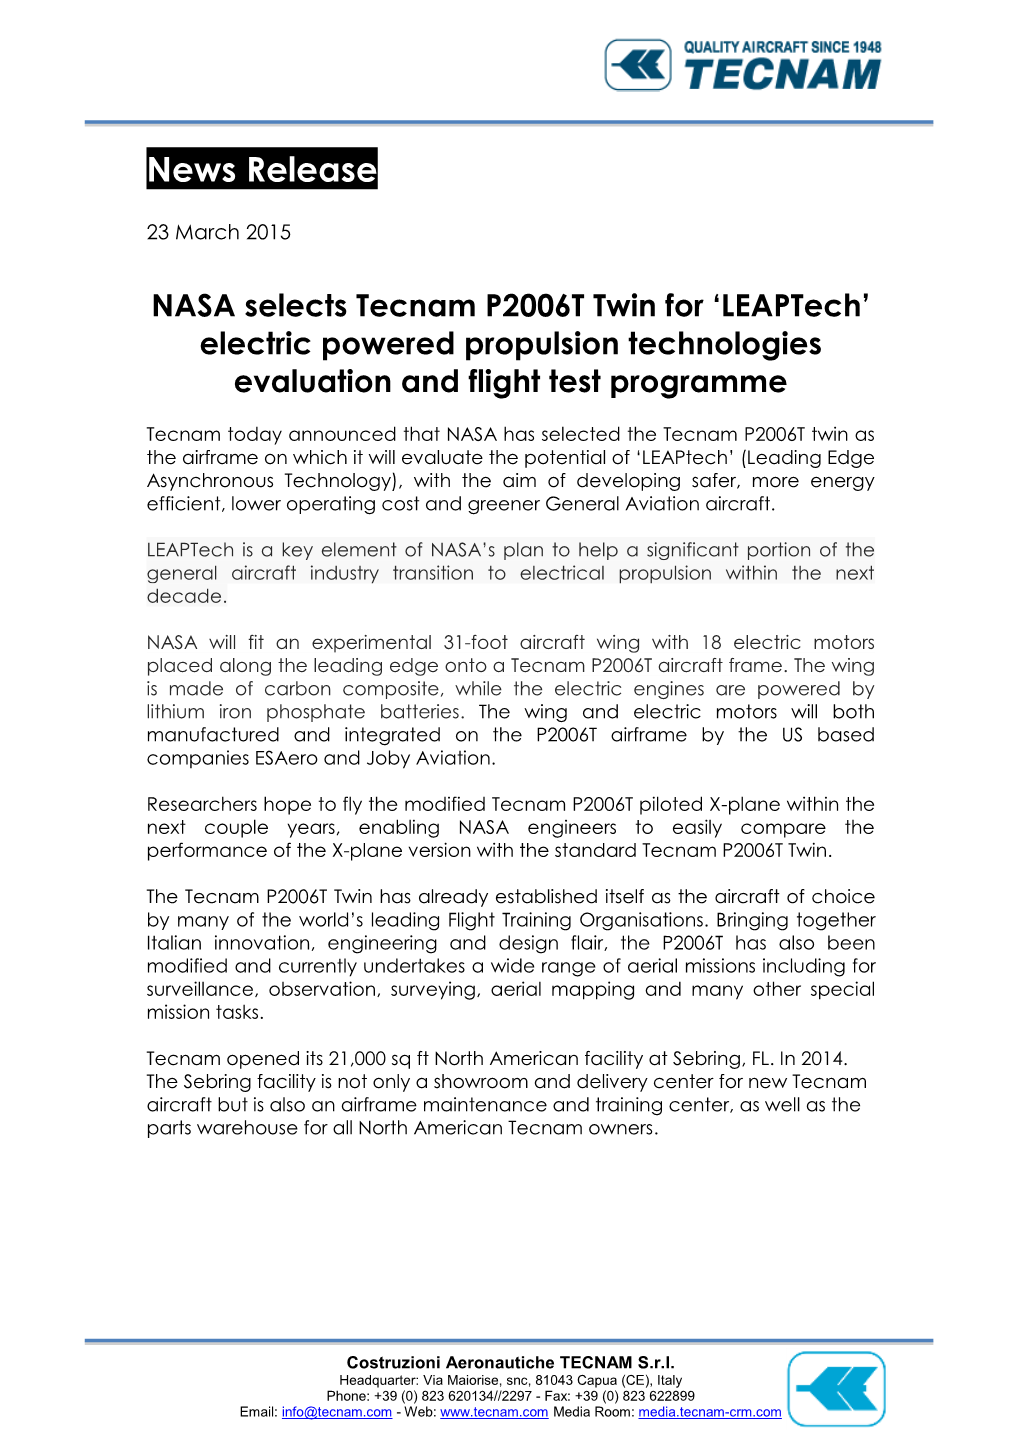 NASA Selects Tecnam P2006T Twin for 'Leaptech'